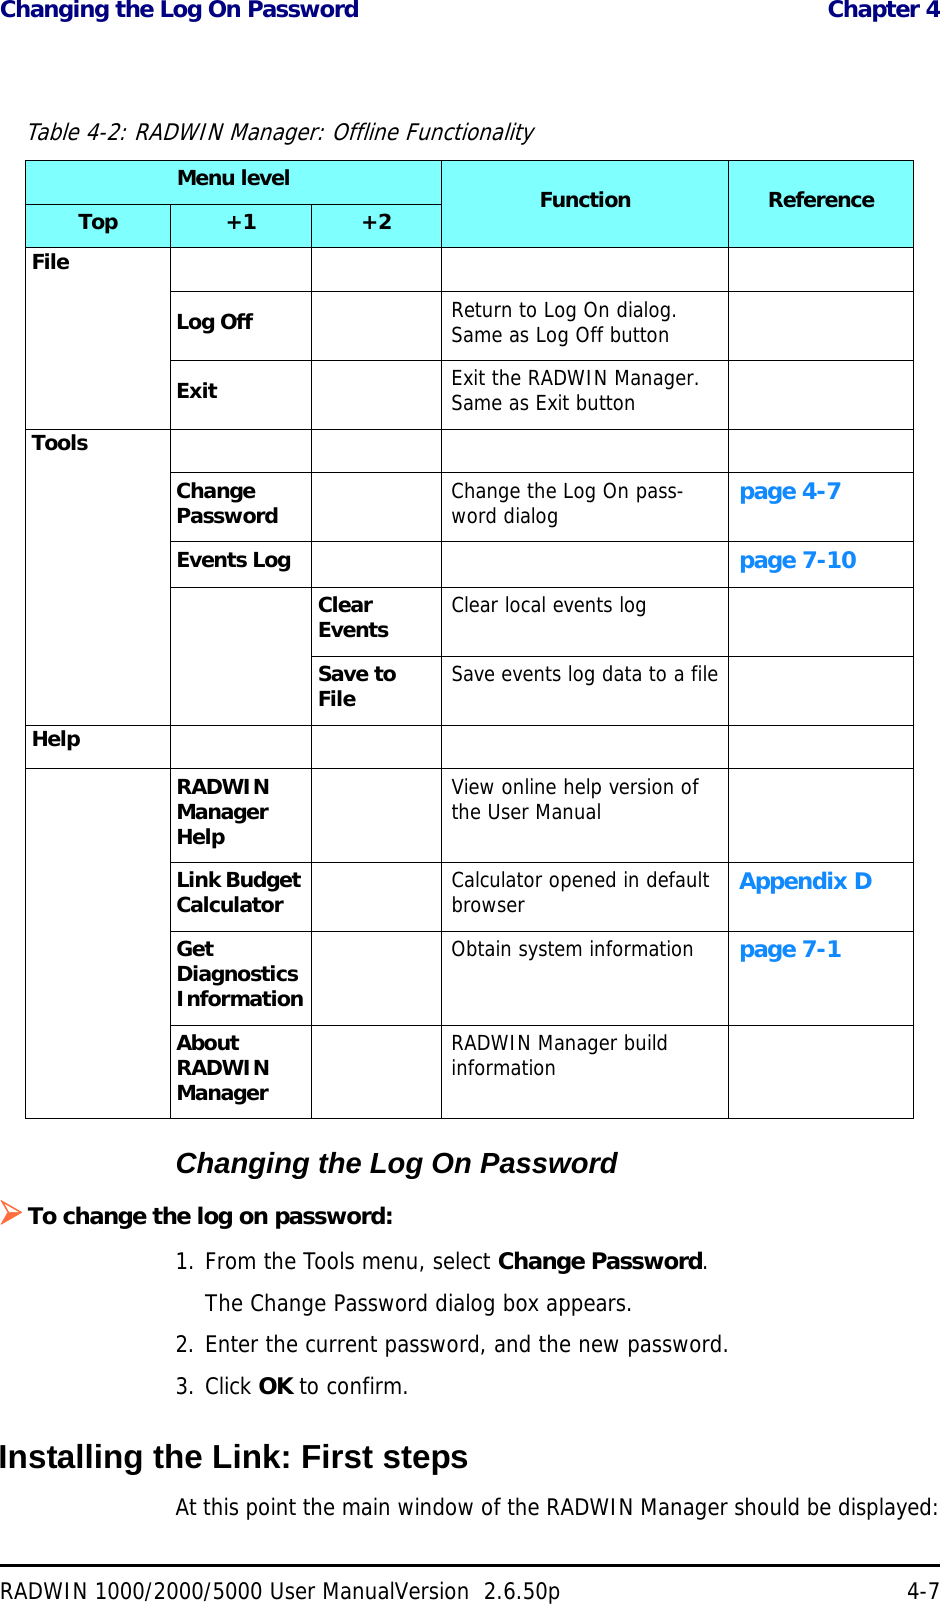 Changing the Log On Password  Chapter 4RADWIN 1000/2000/5000 User ManualVersion  2.6.50p 4-7Changing the Log On PasswordTo change the log on password:1. From the Tools menu, select Change Password.The Change Password dialog box appears.2. Enter the current password, and the new password.3. Click OK to confirm.Installing the Link: First stepsAt this point the main window of the RADWIN Manager should be displayed:Table 4-2: RADWIN Manager: Offline FunctionalityMenu level Function ReferenceTop +1 +2FileLog Off Return to Log On dialog. Same as Log Off buttonExit Exit the RADWIN Manager. Same as Exit buttonToolsChange Password Change the Log On pass-word dialog page 4-7Events Log page 7-10Clear Events Clear local events logSave to File Save events log data to a fileHelpRADWIN Manager HelpView online help version of the User ManualLink Budget Calculator Calculator opened in default browser Appendix DGet Diagnostics InformationObtain system information page 7-1About RADWIN ManagerRADWIN Manager build information